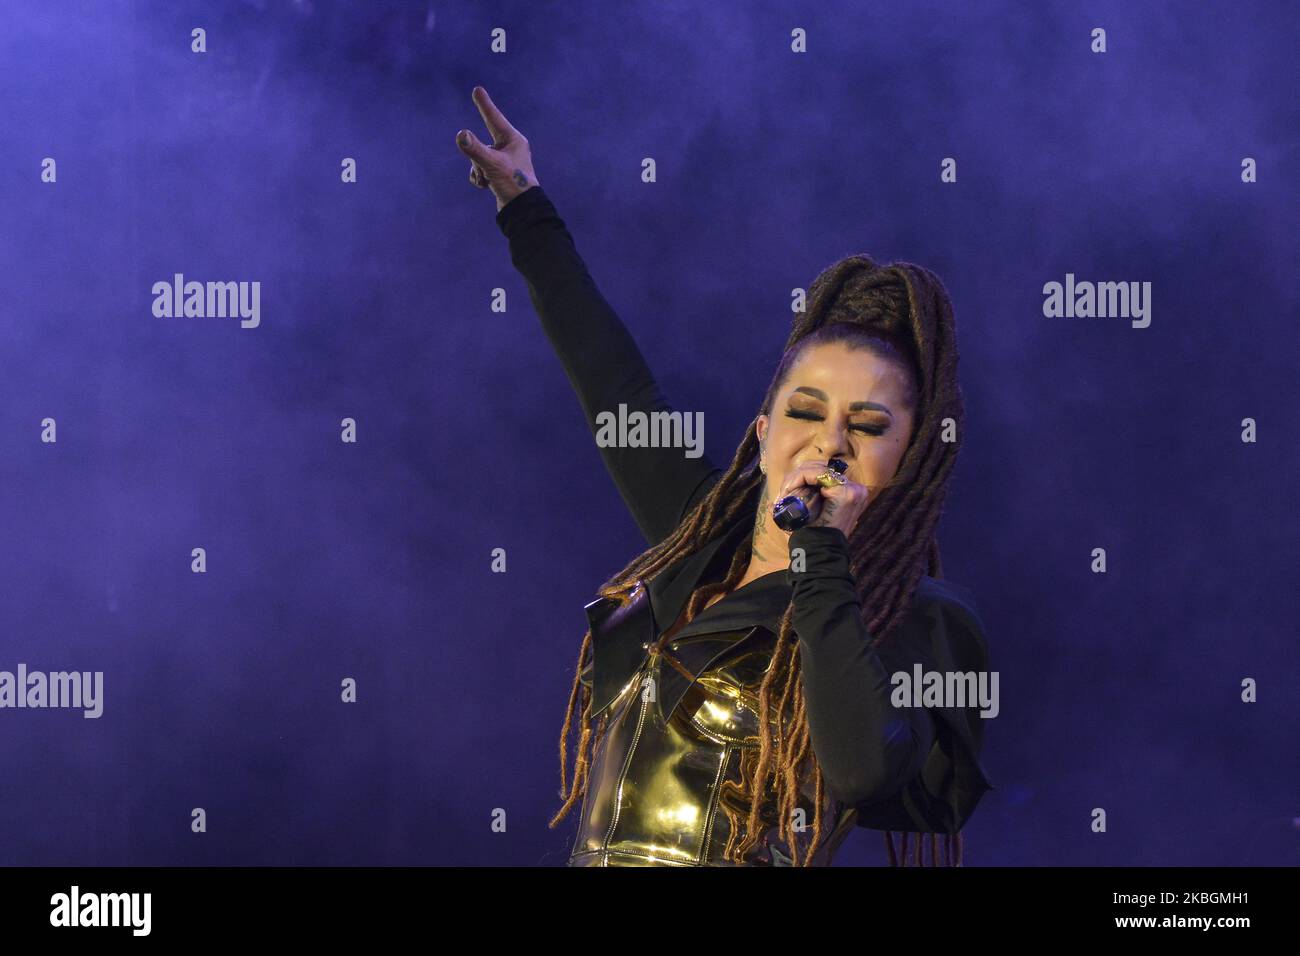 Alejandra Guzman, 52, performing on stage in concert during her La Guzman Tour at Mexico City Arena on February 8, 2020 in Mexico City, Mexico (Photo by Eyepix/NurPhoto) Stock Photo